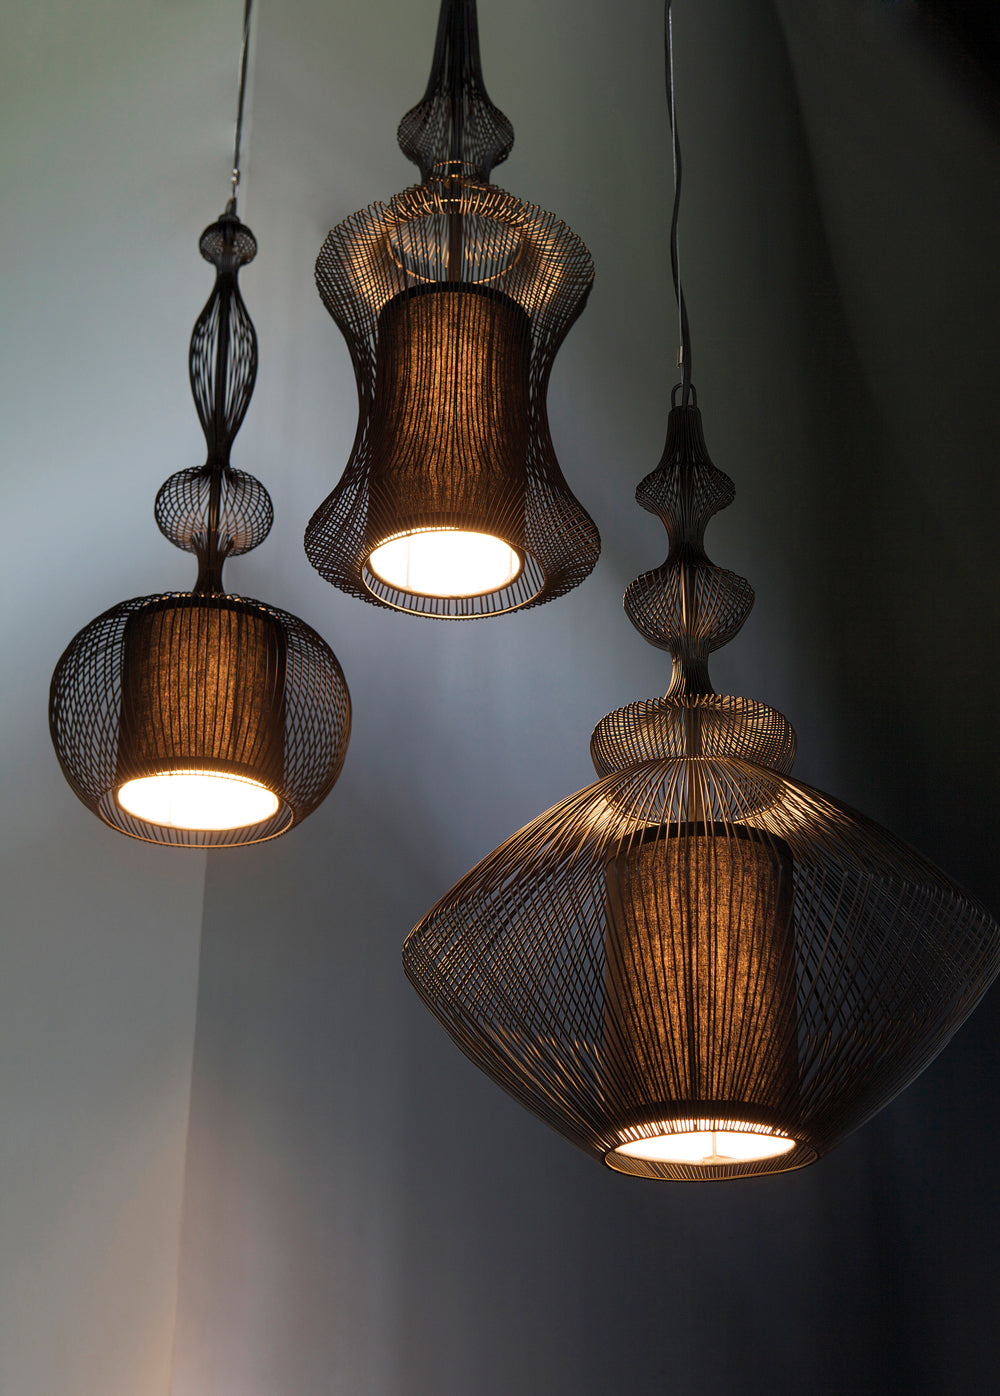 Imperatrice Pendant Light by Forestier